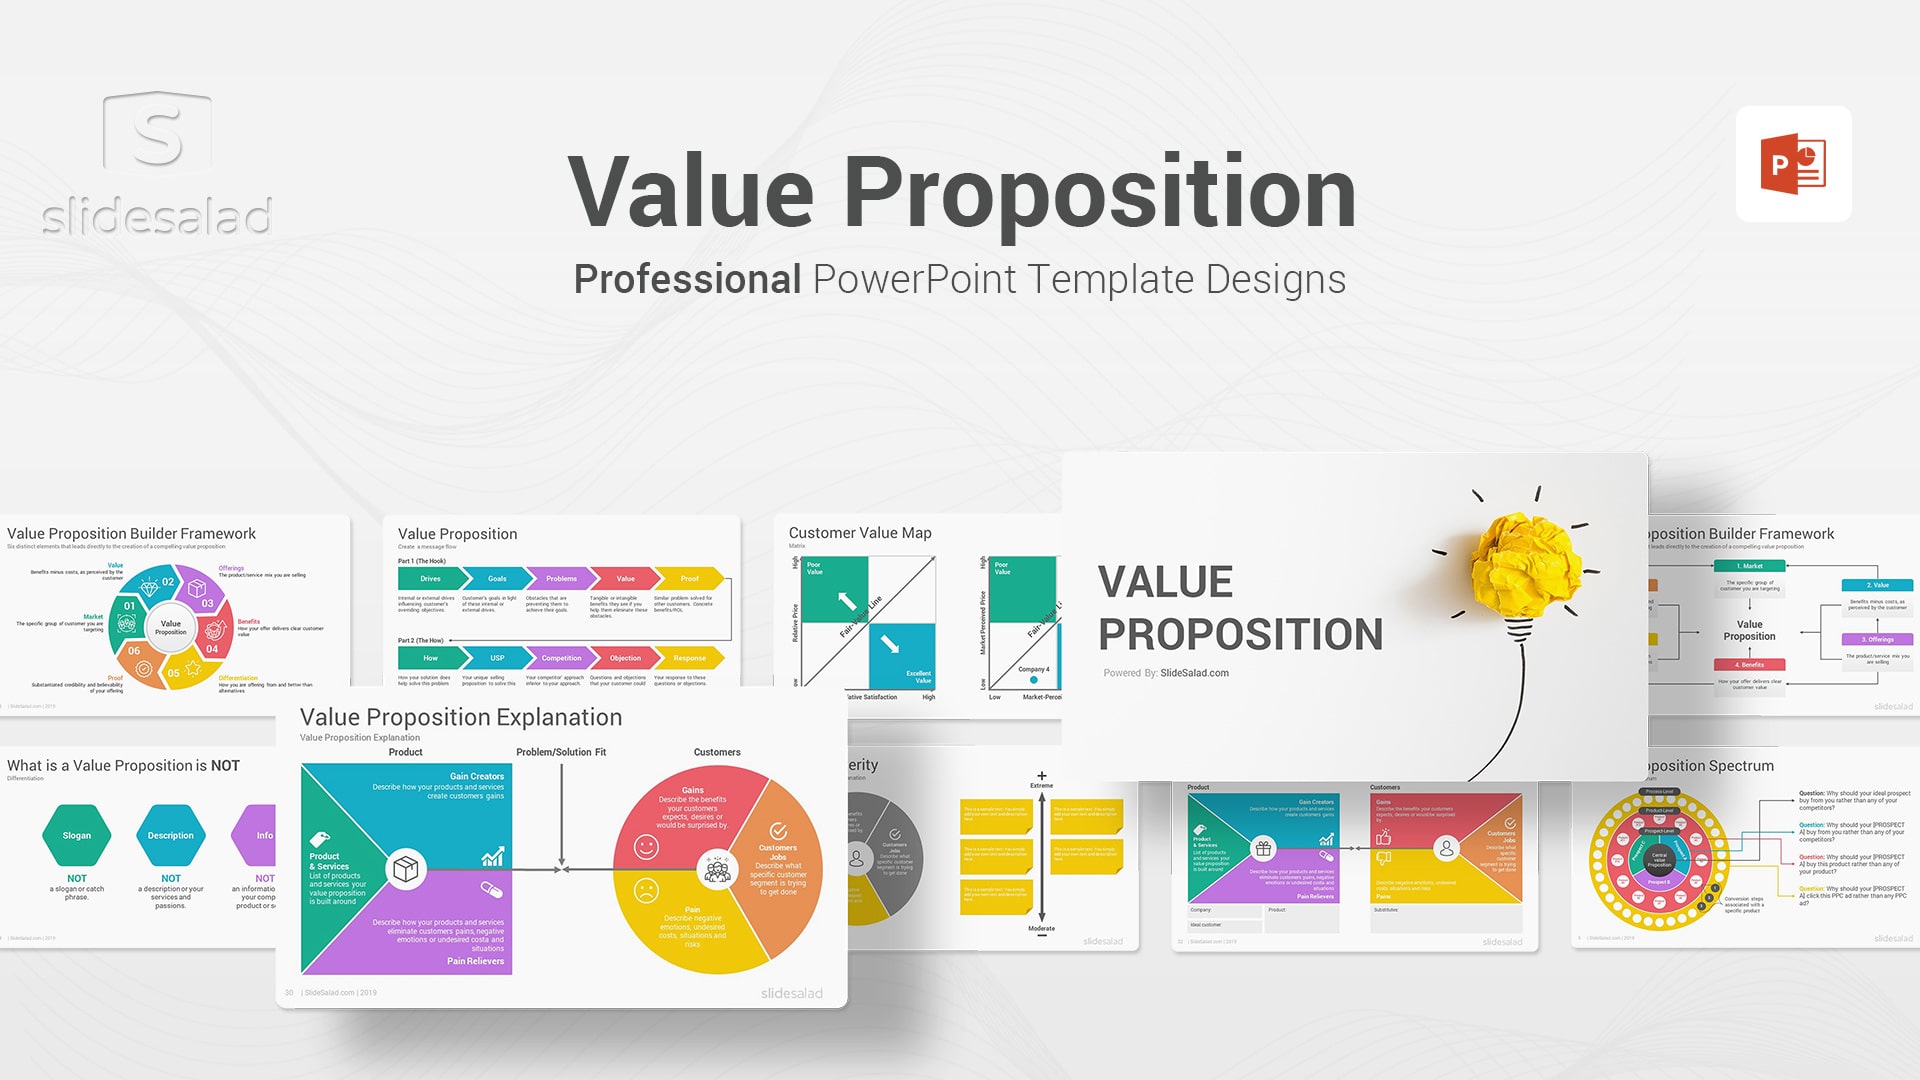 Value Proposition PowerPoint Template - Premium Creative PPT Design Themes and Layouts